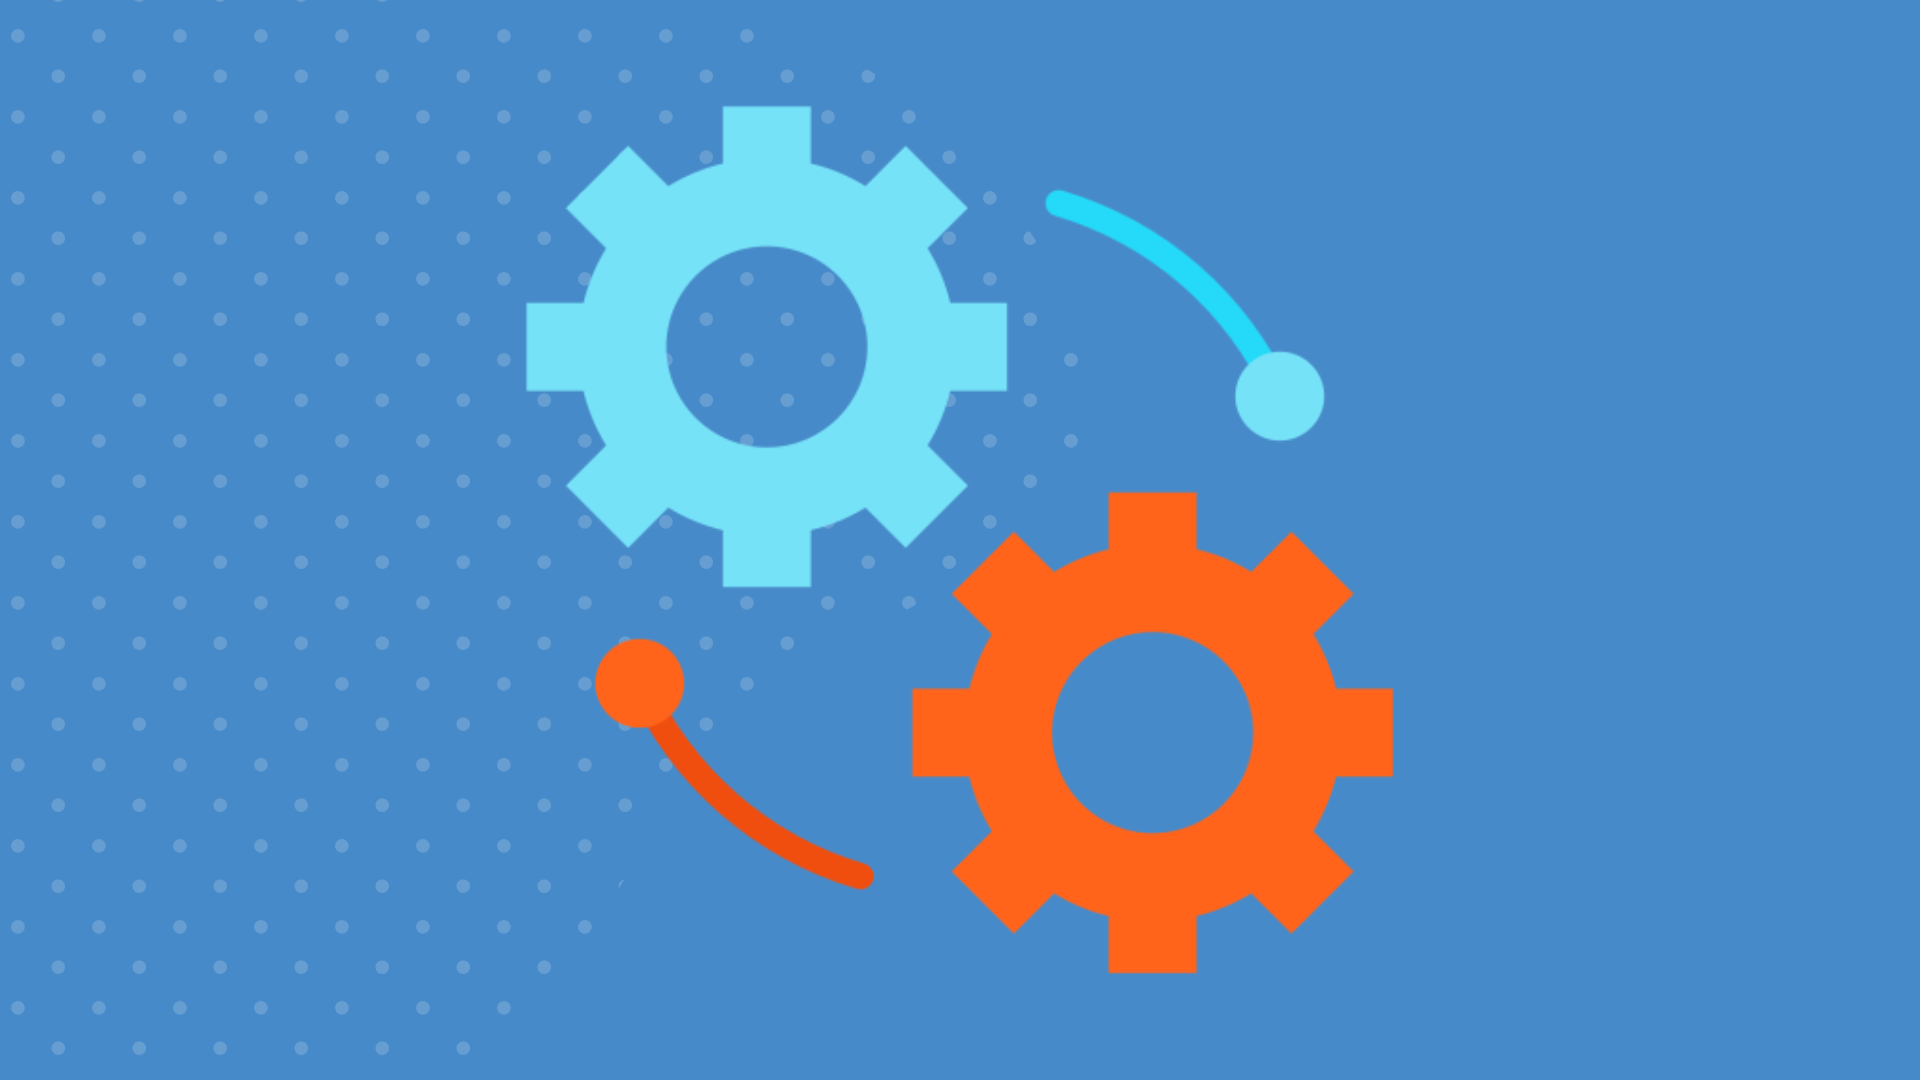 Graphic of a blue gear and orange gear interacting, to represent helpful integrations, on a blue background.